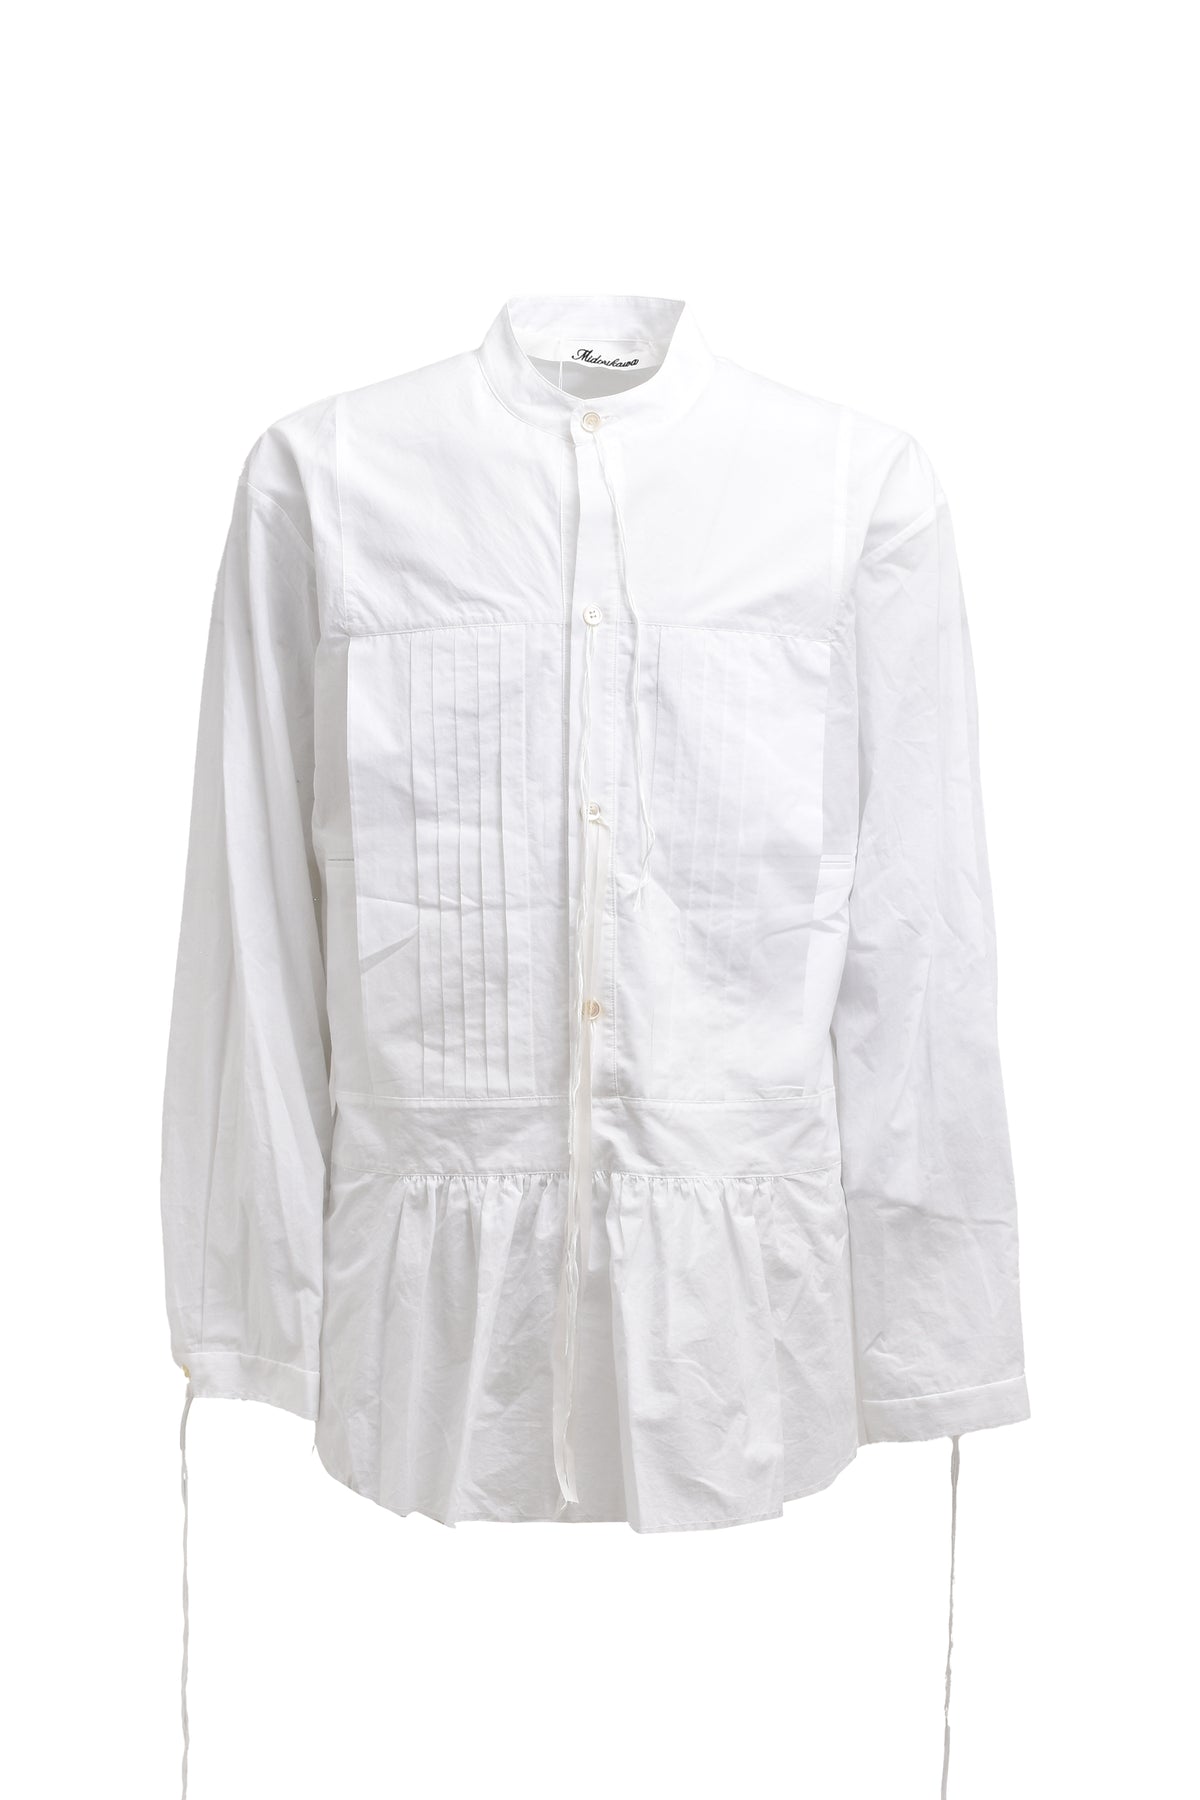 PULLOVER PIN TUCK SHIRTS / WHT